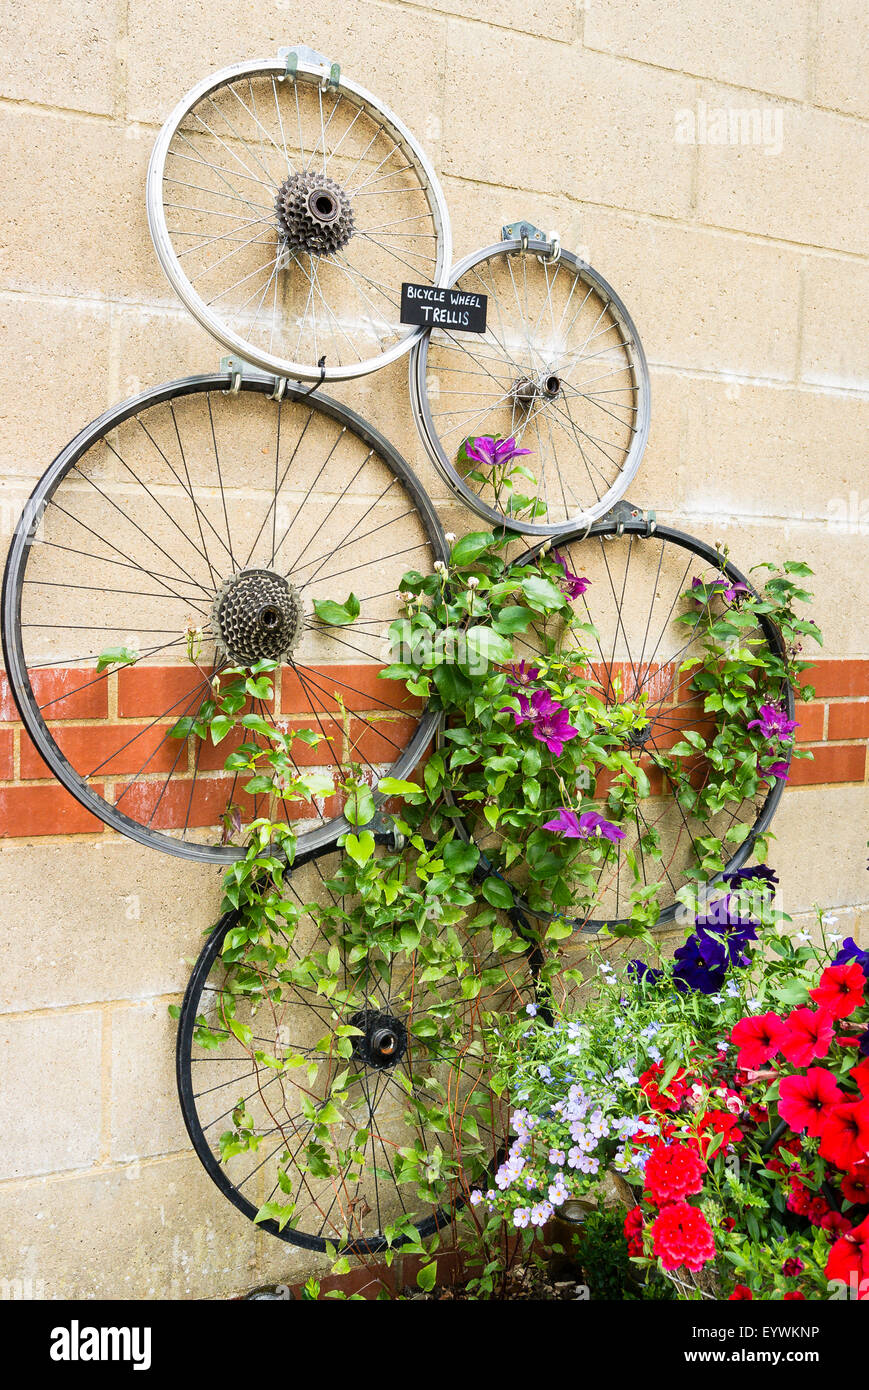 Five old bicycle wheels fixed to a wall to help train clematis climber plants Stock Photo